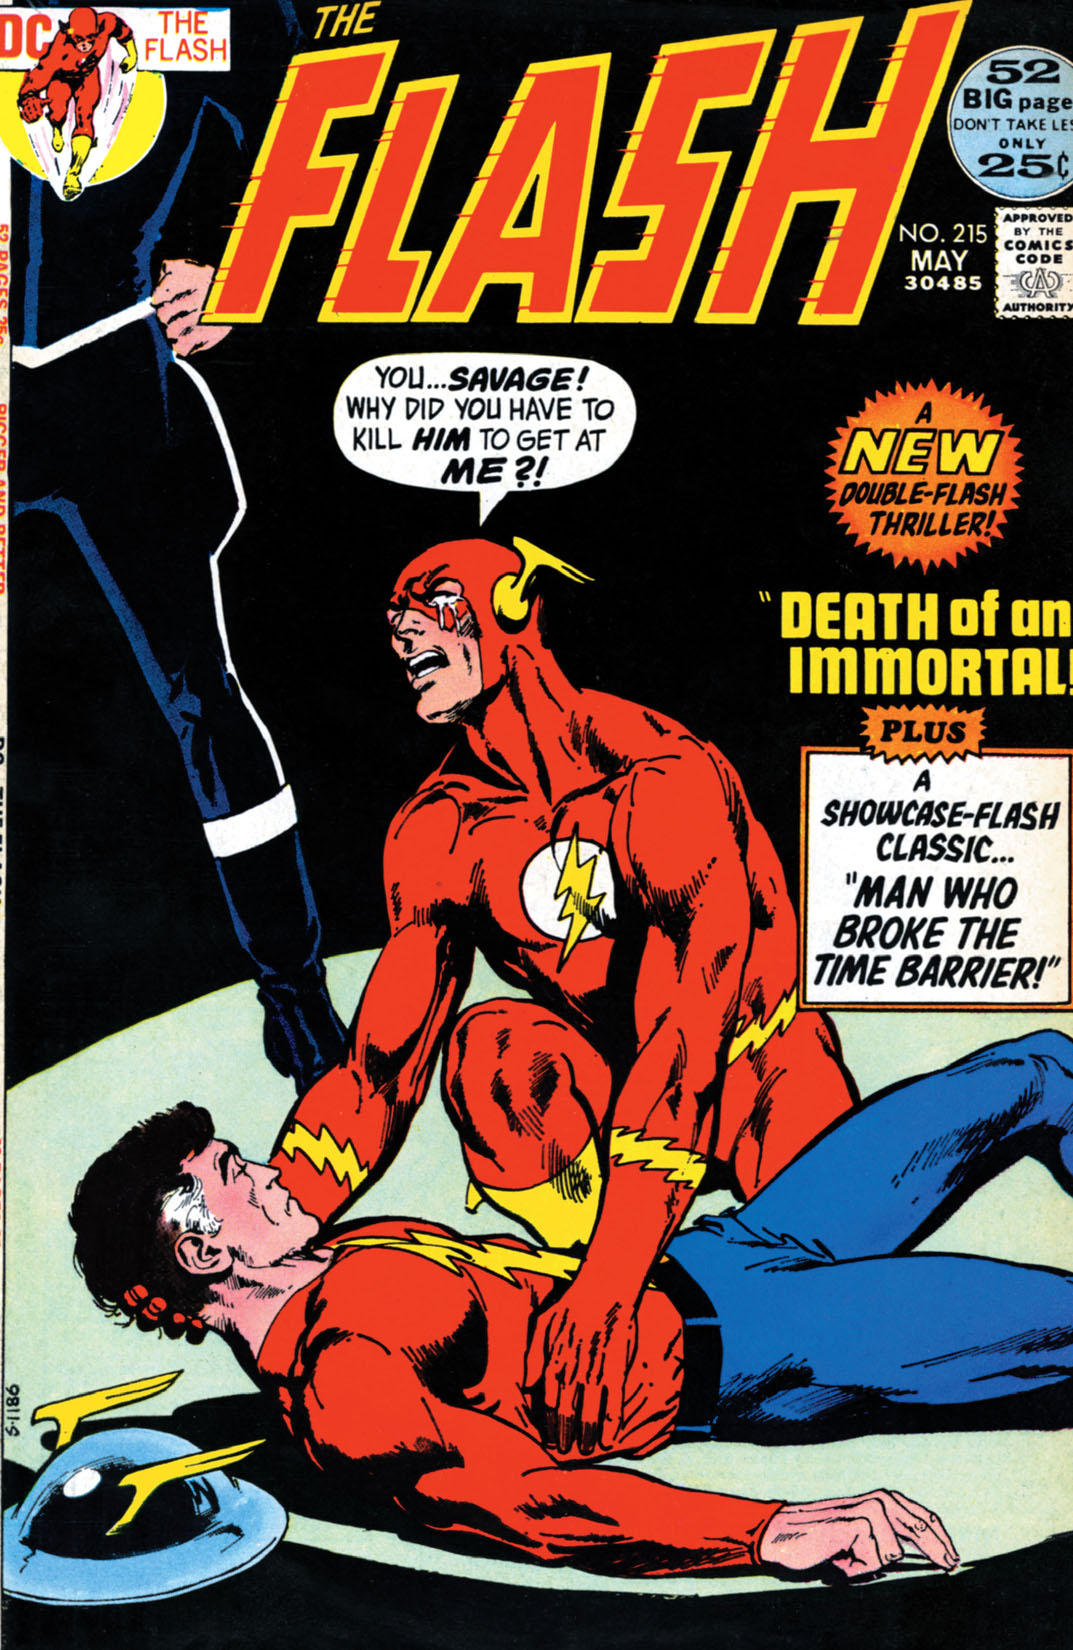 The Flash (1959-) #215 preview images